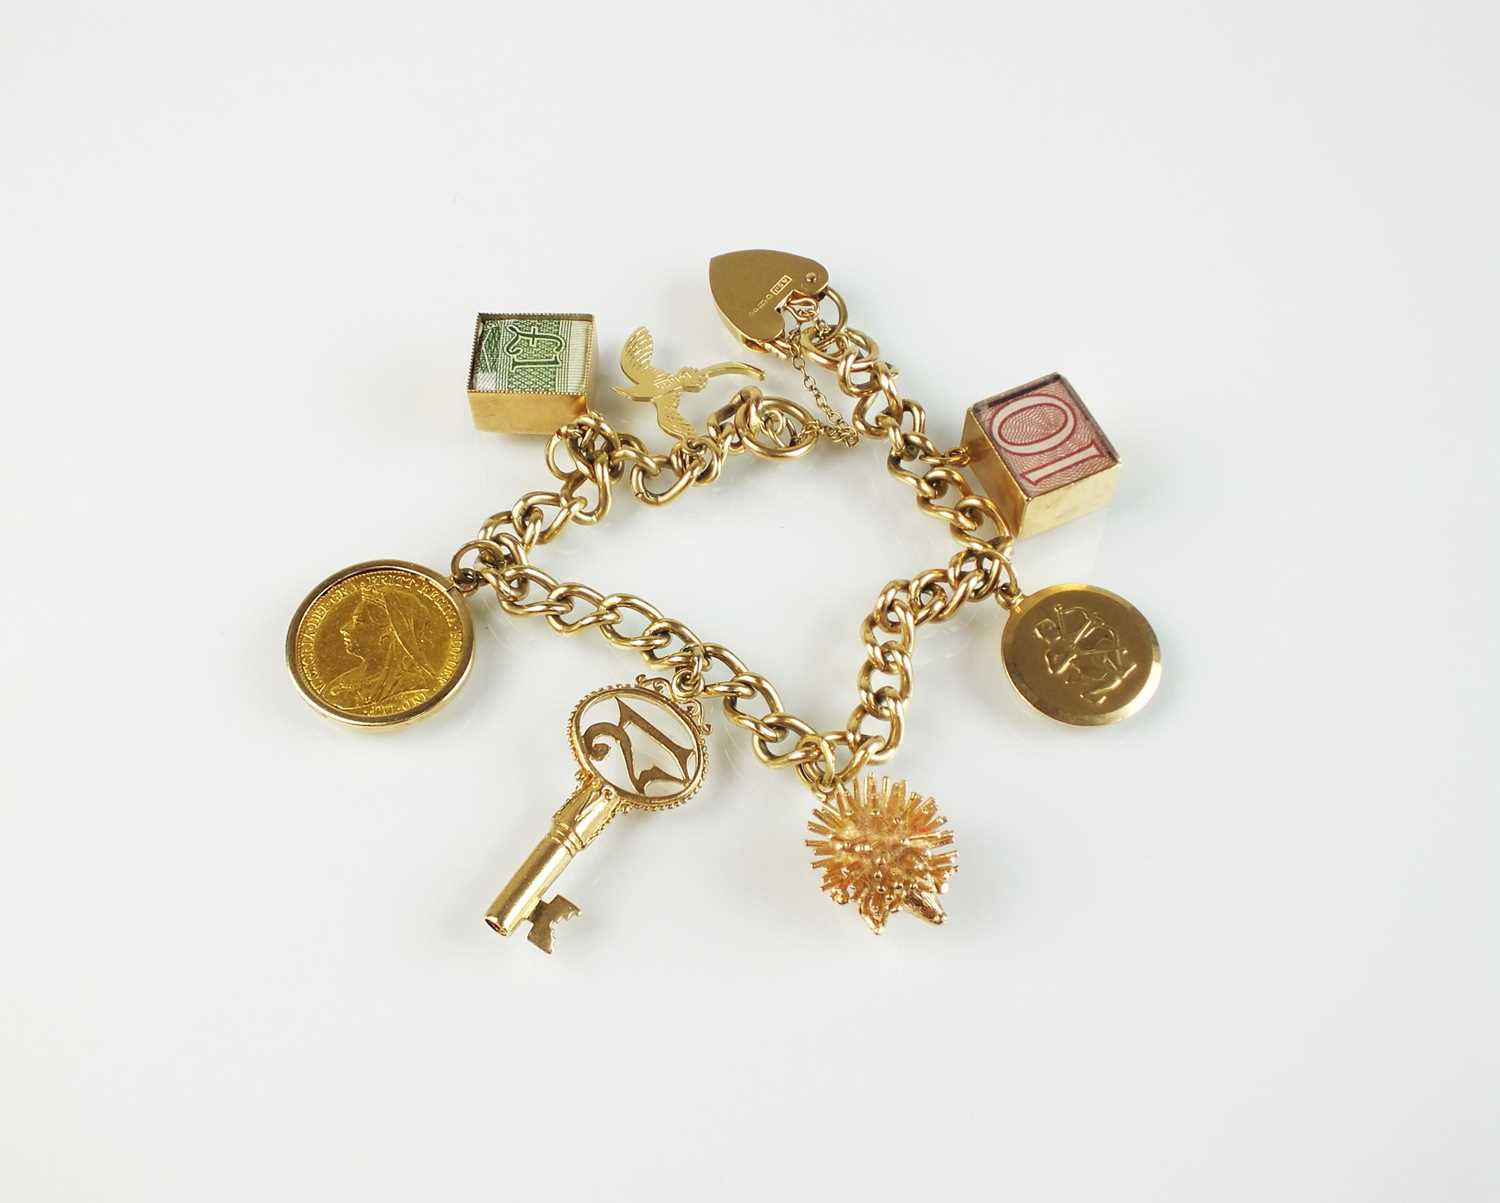 Lot 63 - A 9ct gold curb link bracelet with attached charms